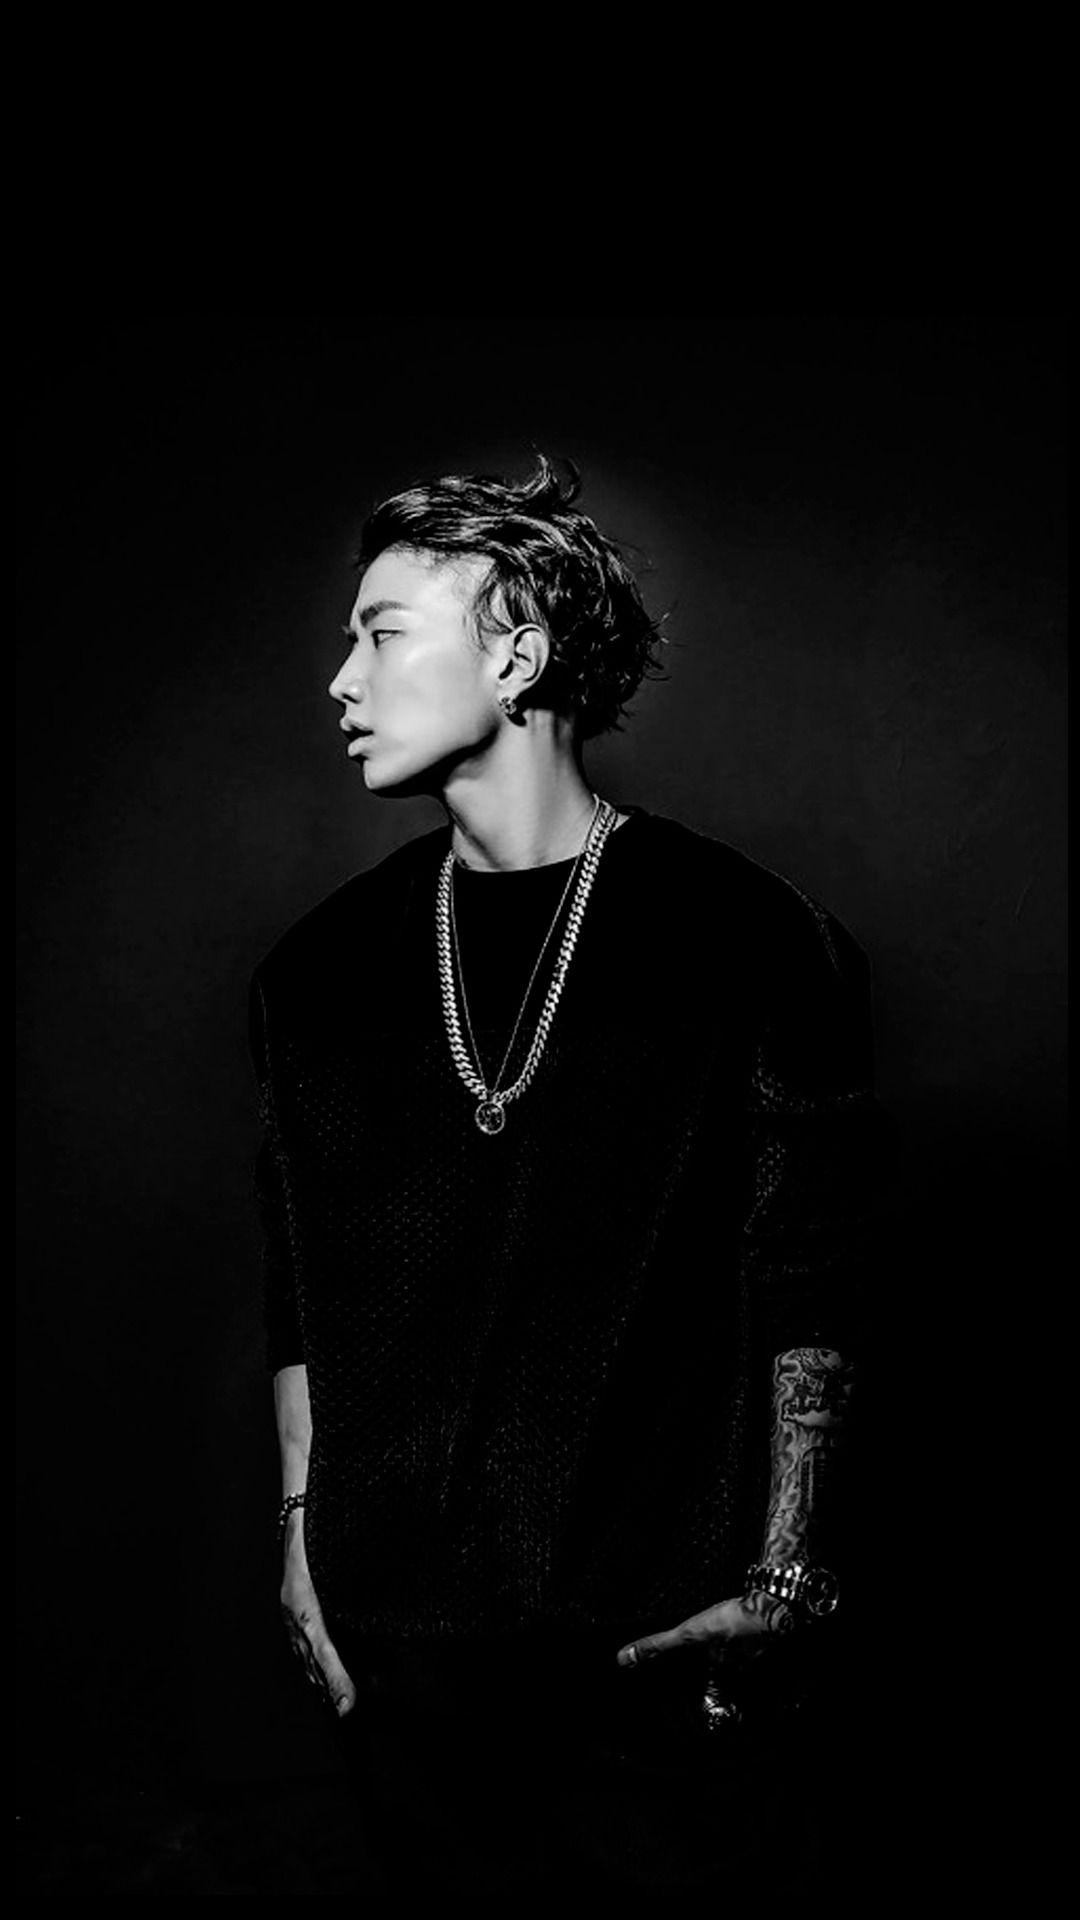 ✧・ﾟ: *✧・ﾟ:*, JAY PARK WALLPAPERS 1080x1920px please